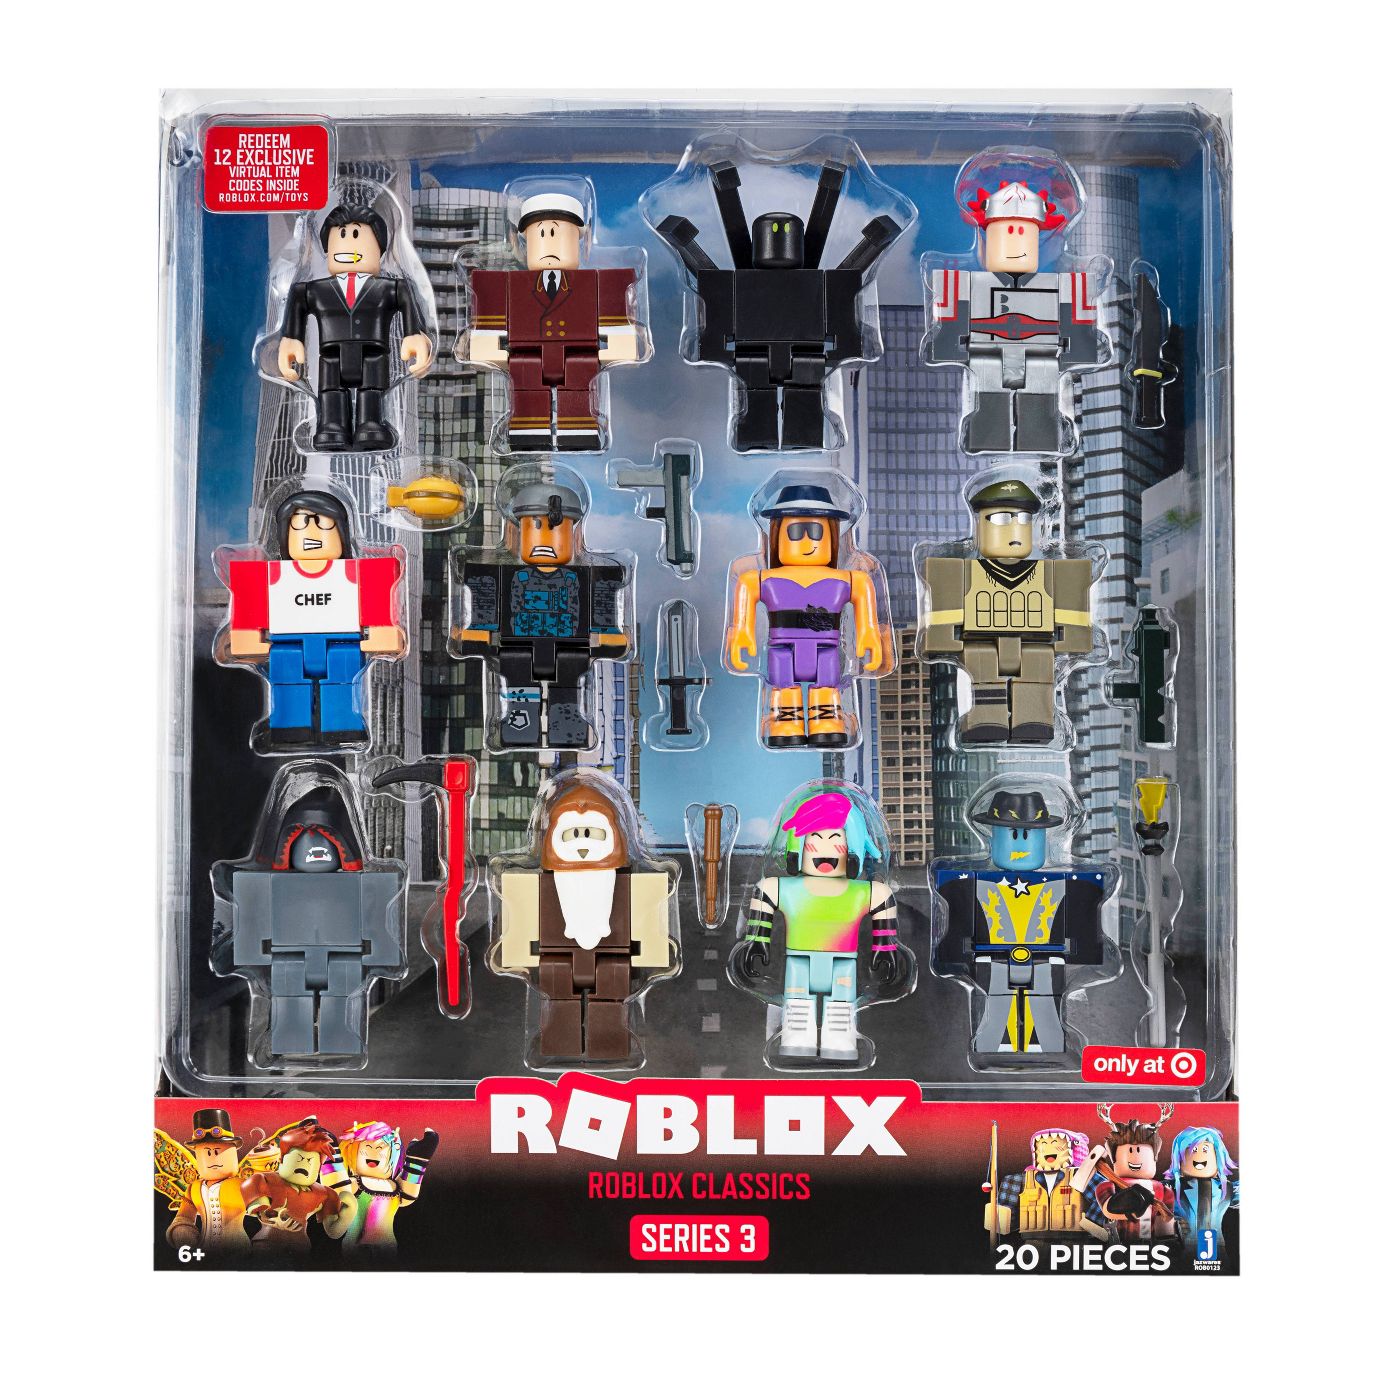 Roblox 12 Mystery Figures Series 3 New Toys Bundle Limited Set Lot 22pc No Codes Action Figures Tv Movie Video Games - all roblox series 3 toy code items